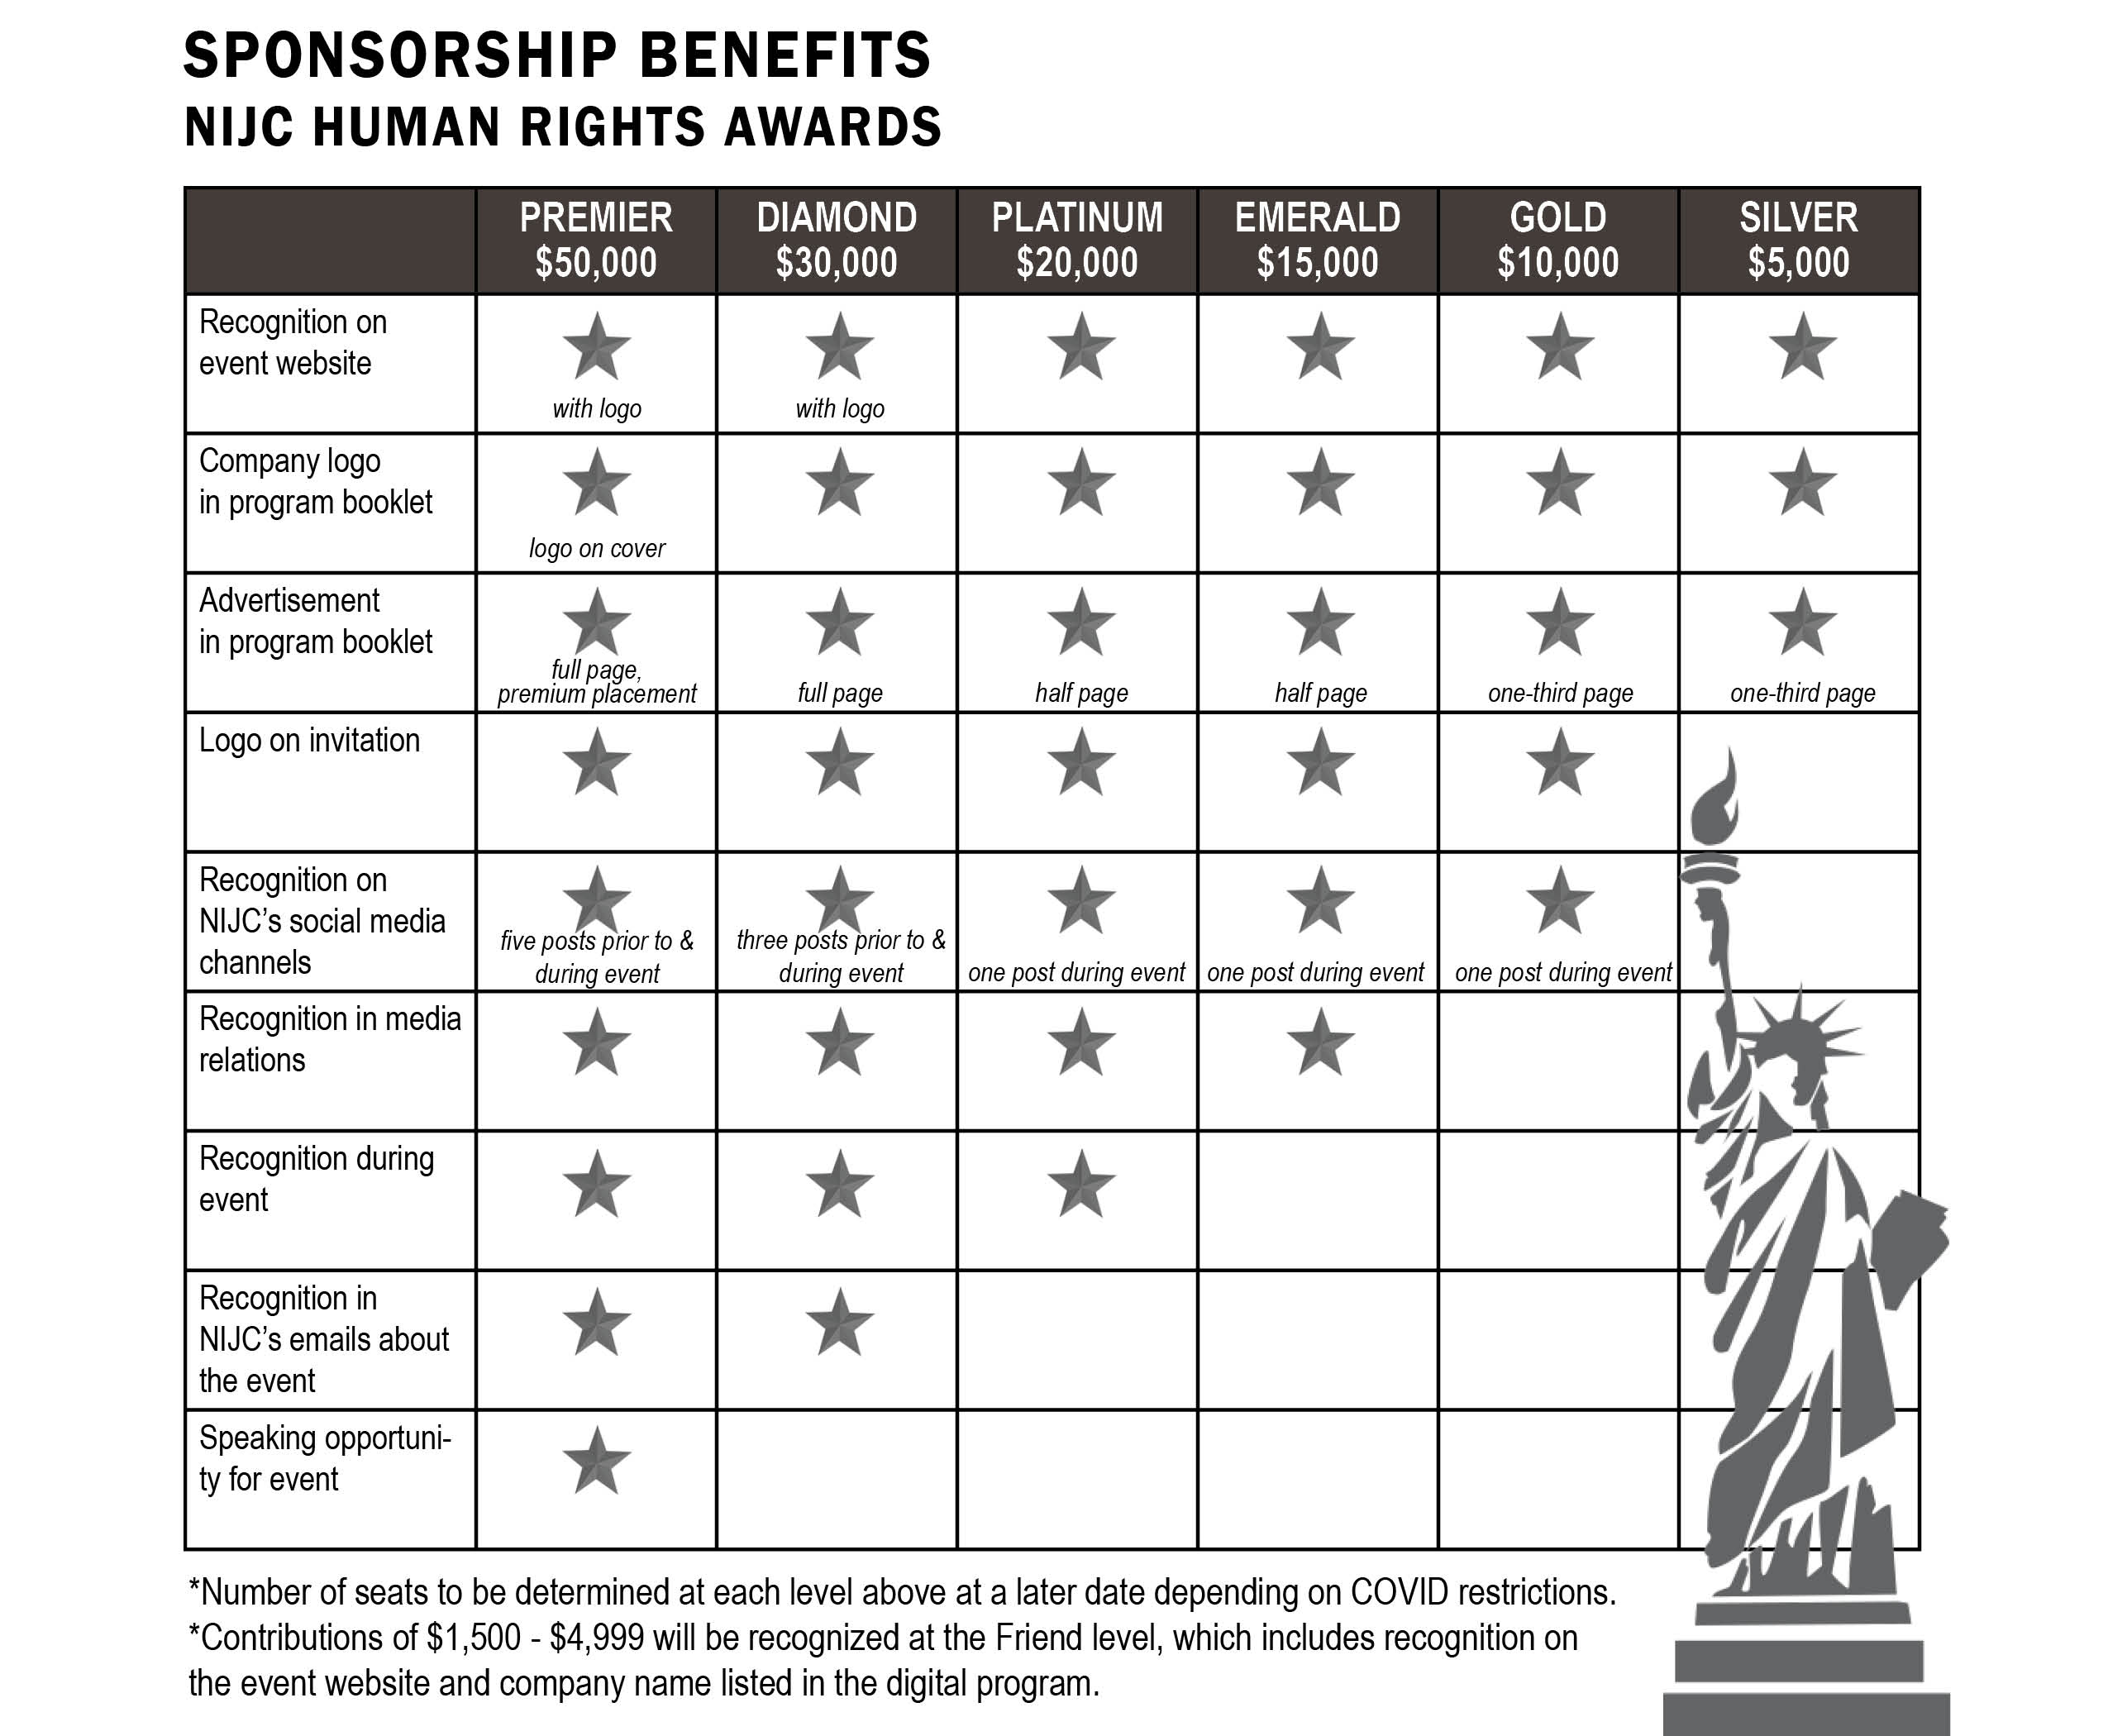 Table indicating benefits of sponsorship levels for the Human Rights Awards